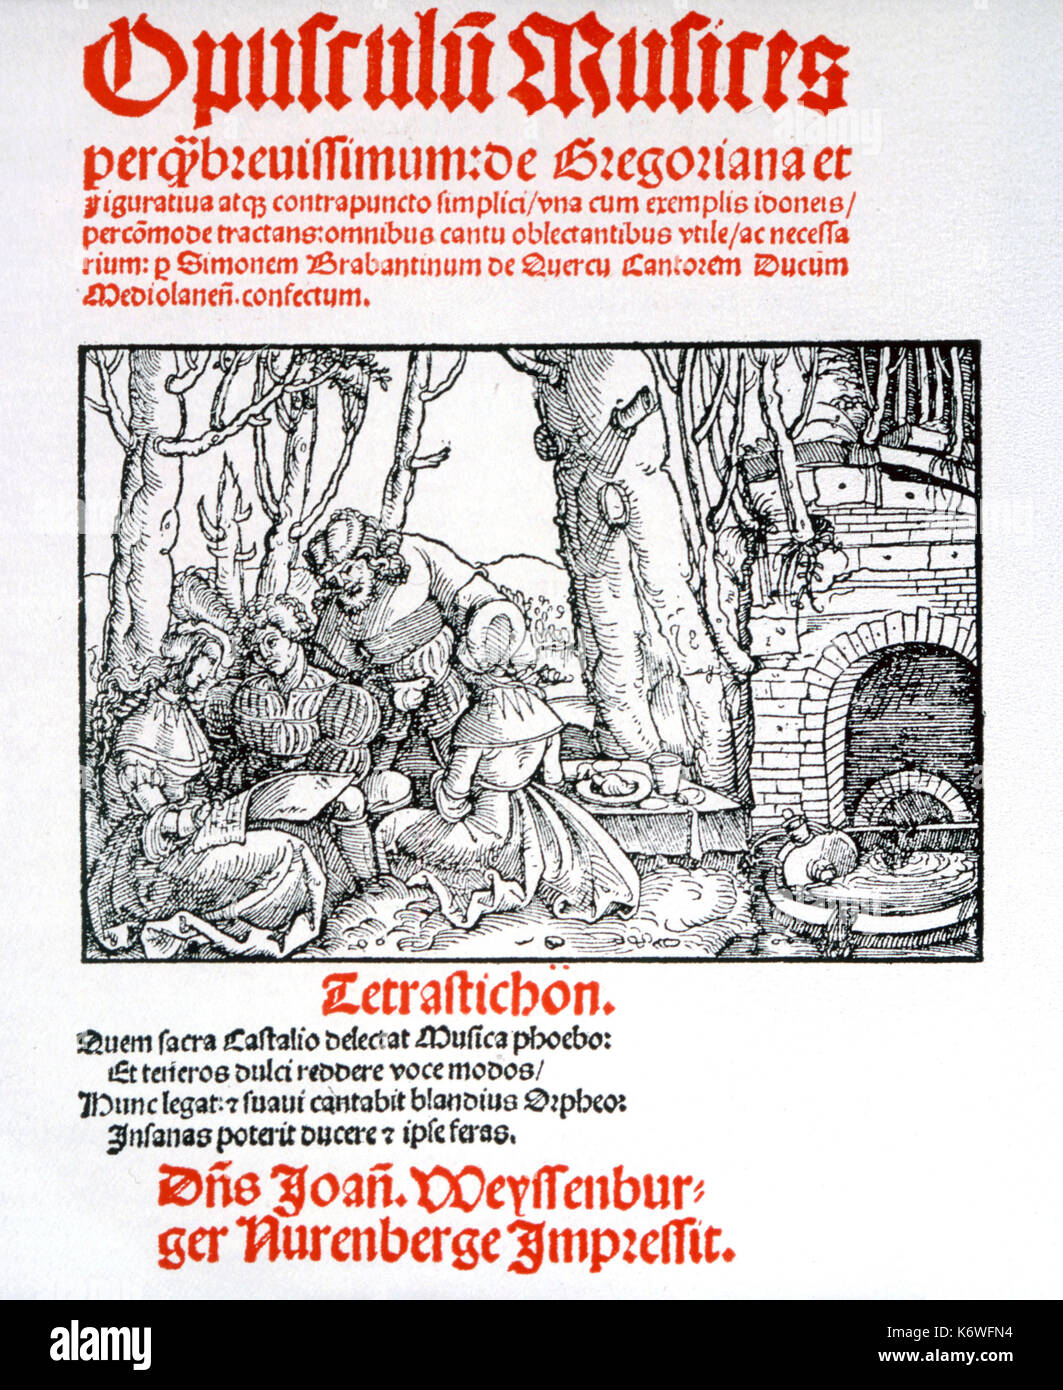 CHOIR - MADRIGAL SINGERS - 1513 page from Simon de QUERCU's 'Opusculum Musices' showing pastoral scene with men & women. singing from Music.   Chanson. Frottola. Balletto. Madrigals Stock Photo